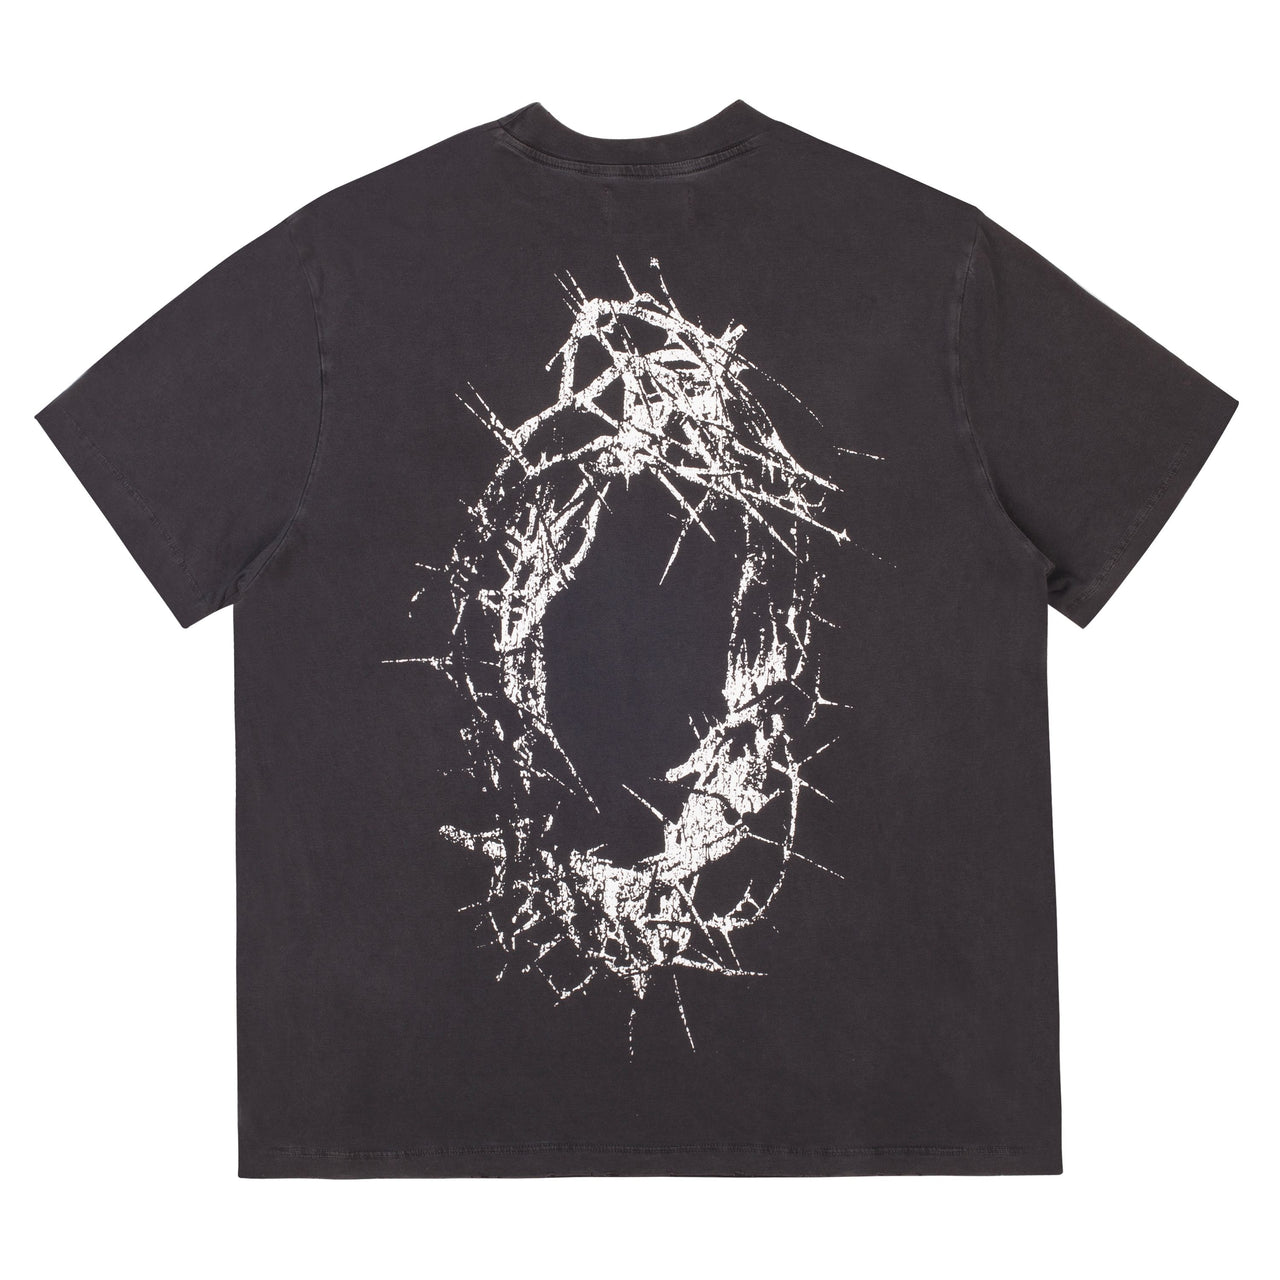 Pieces Paradise on Earth Tee Washed Black